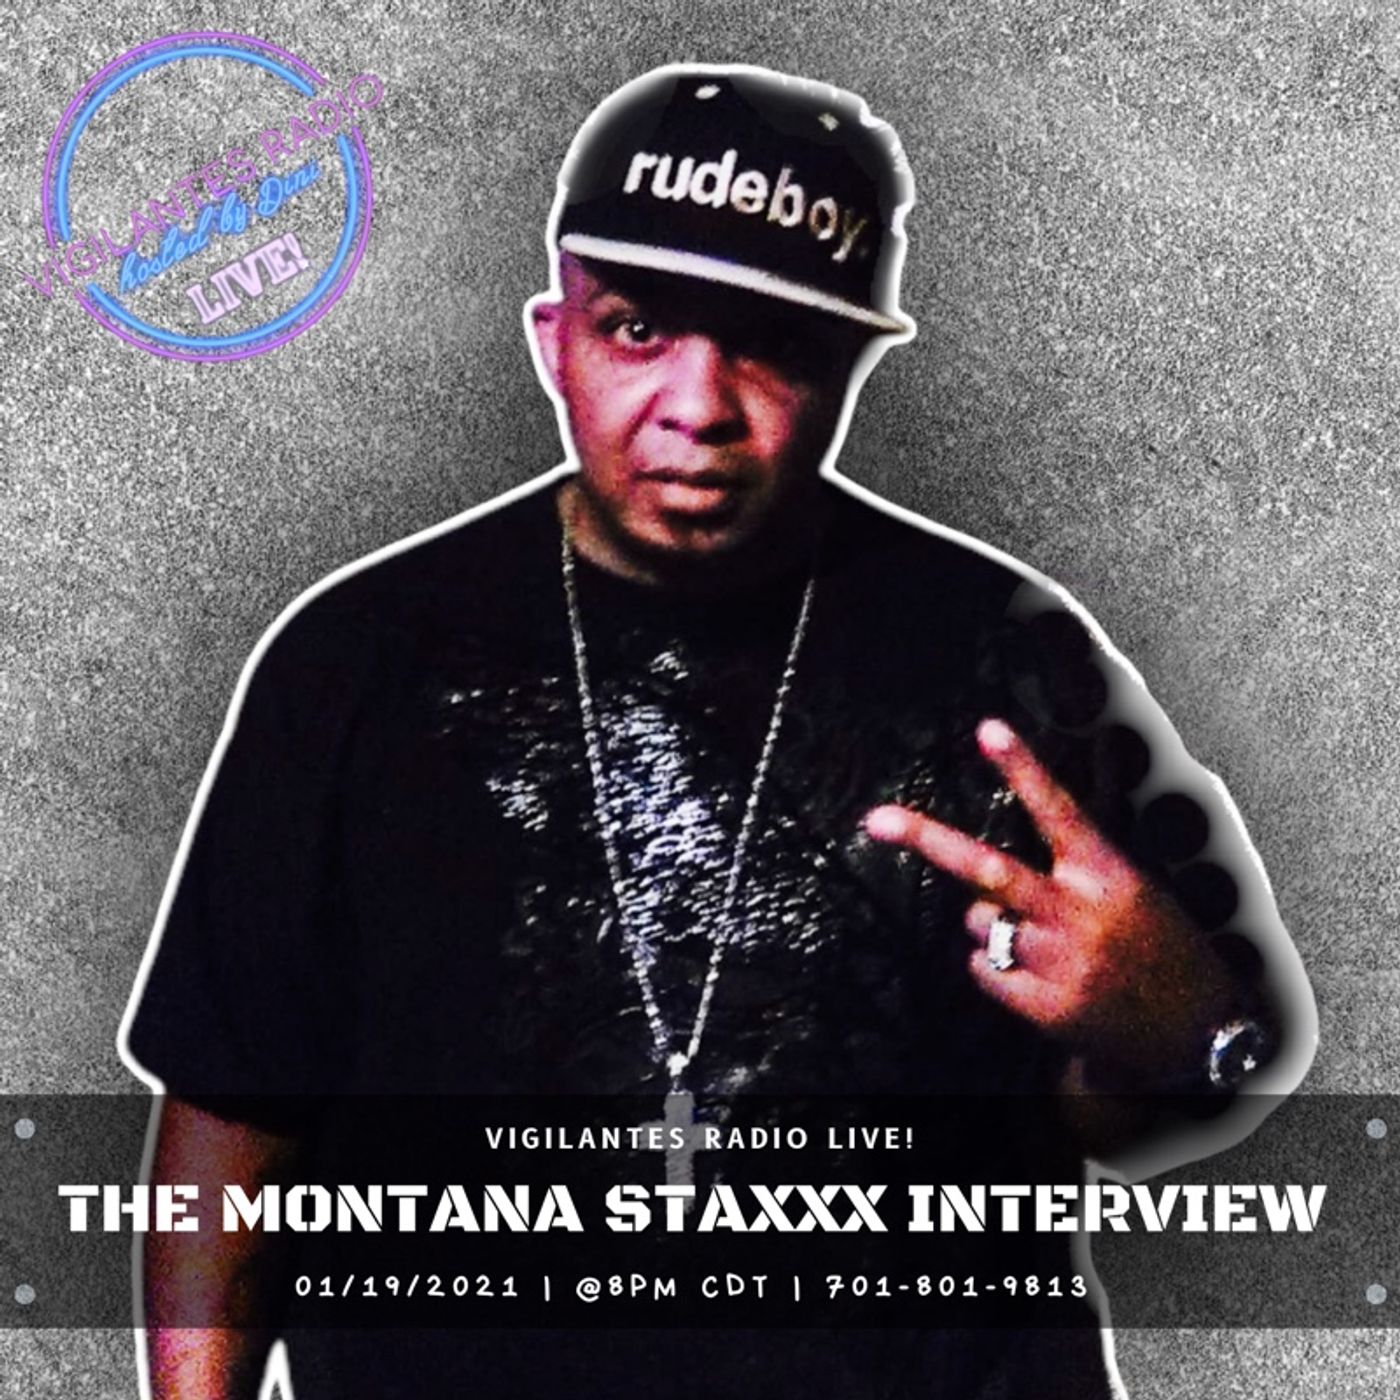 The Montana Staxxx Interview. Image